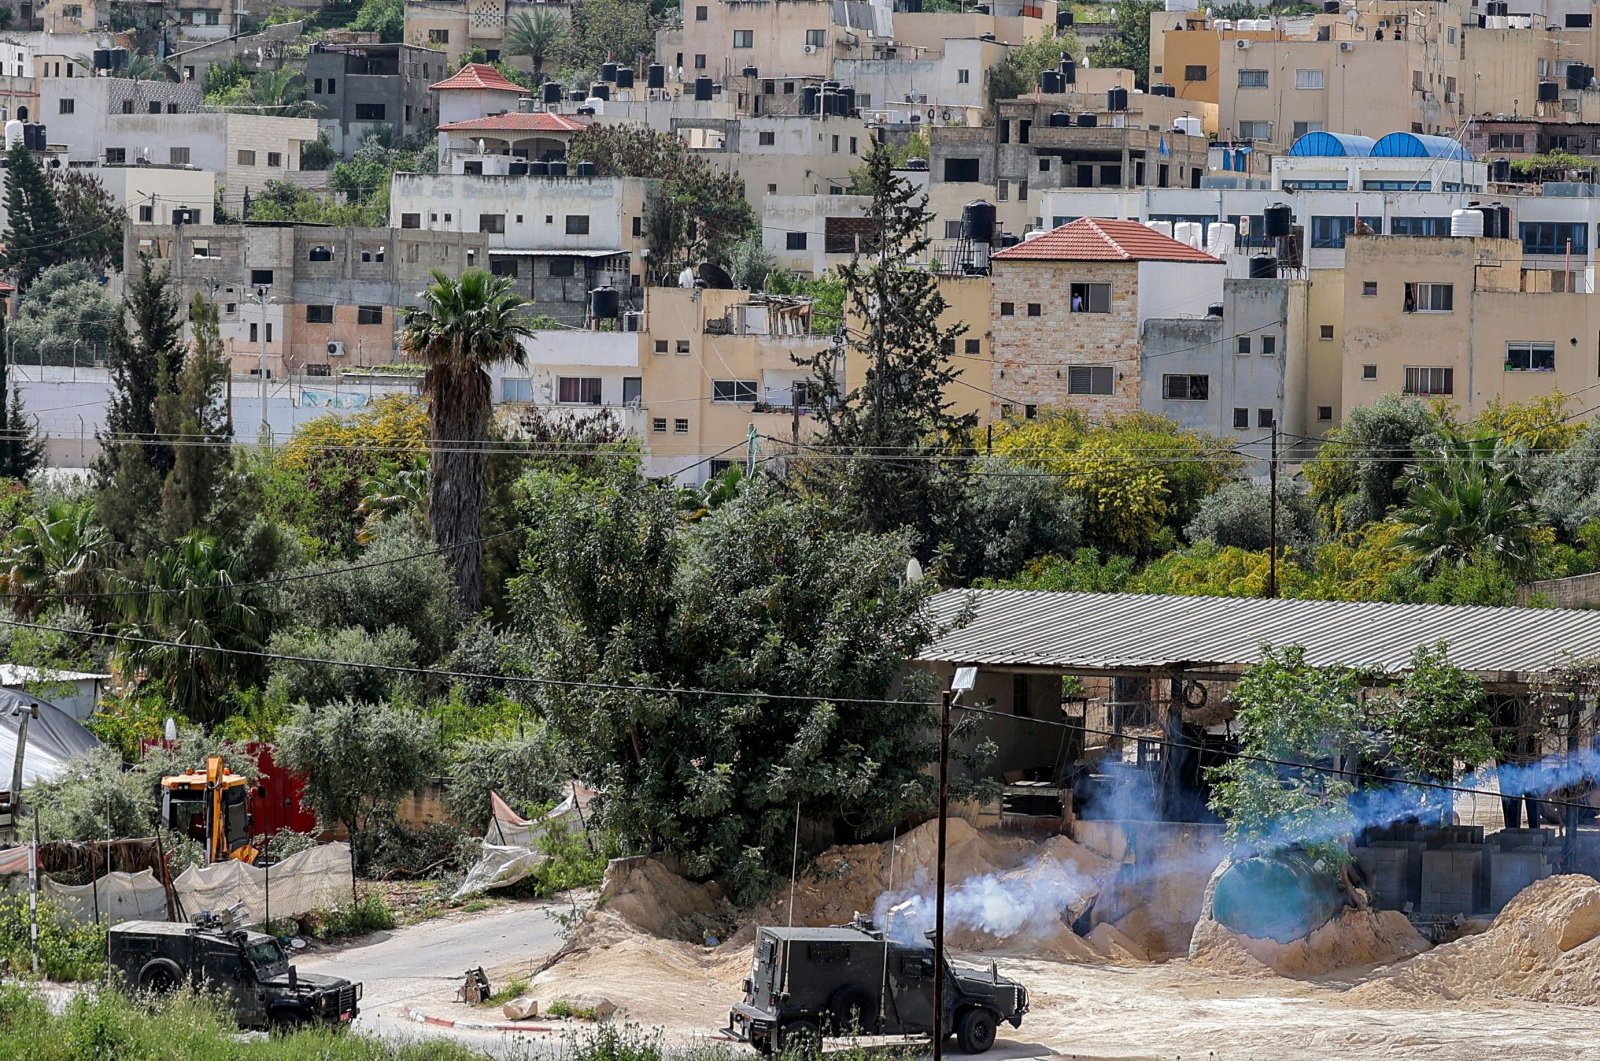 Tear gas canisters are fired from an Israeli military vehicle near the Palestinian refugee camp of Jenin, killing a Palestinian and wounding others, after Israel vowed there will "not be limits" to curb surging violence, in the occupied West Bank, Palestine, April 9, 2022. (AFP Photo)